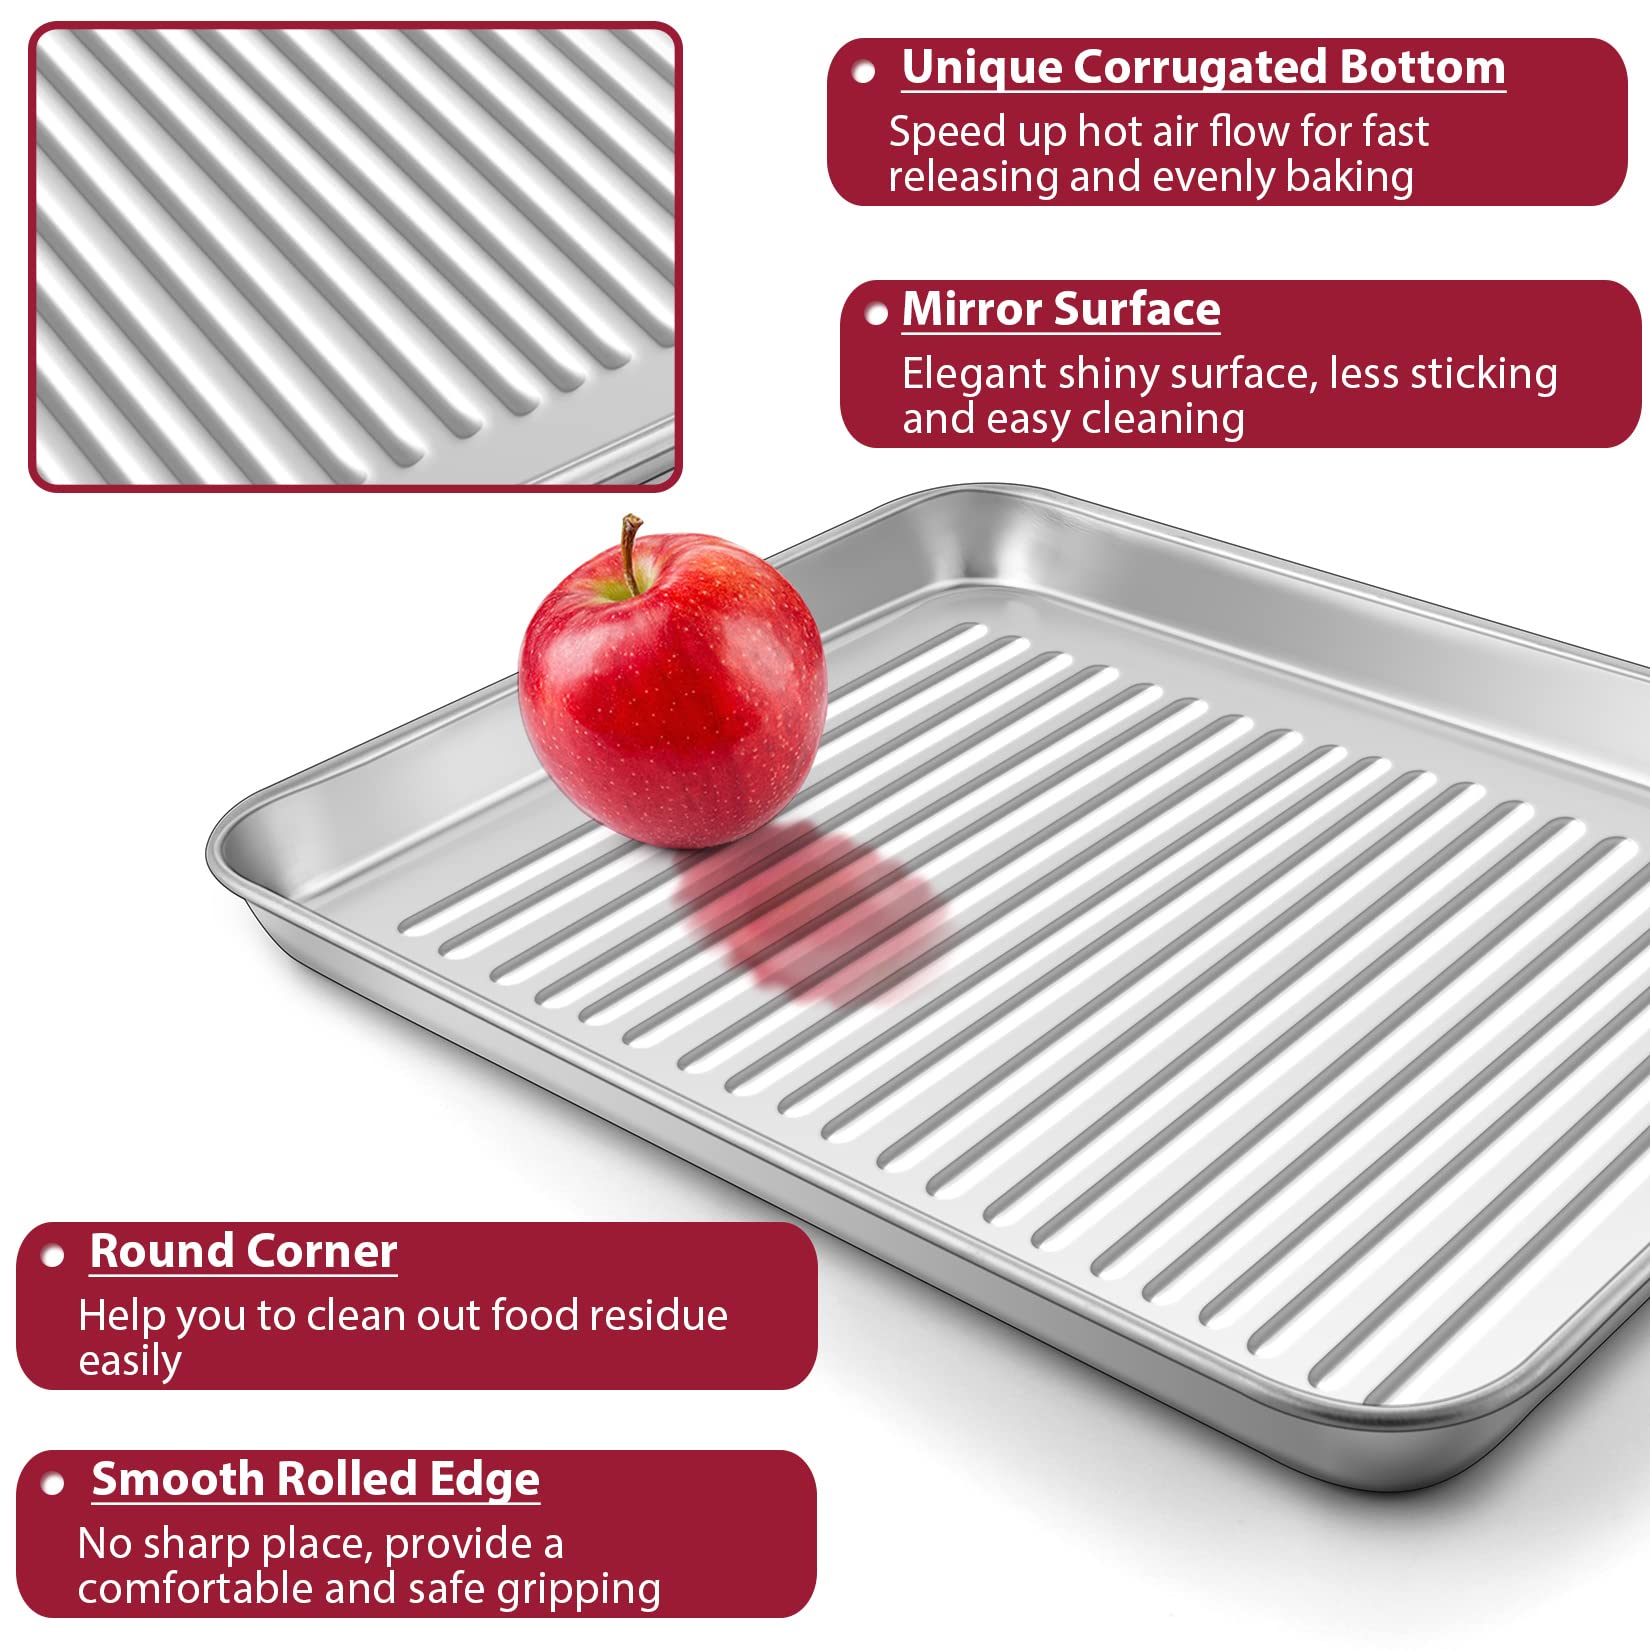 Large Baking Sheet Pan Set of 2 for Oven, P&P CHEF Stainless Steel Cookie Sheets Trays Bakeware, Rectangle 16 x 12 x 1 Inch, Corrugated Bottom & Mirror Finished Surface, Dishwasher Safe